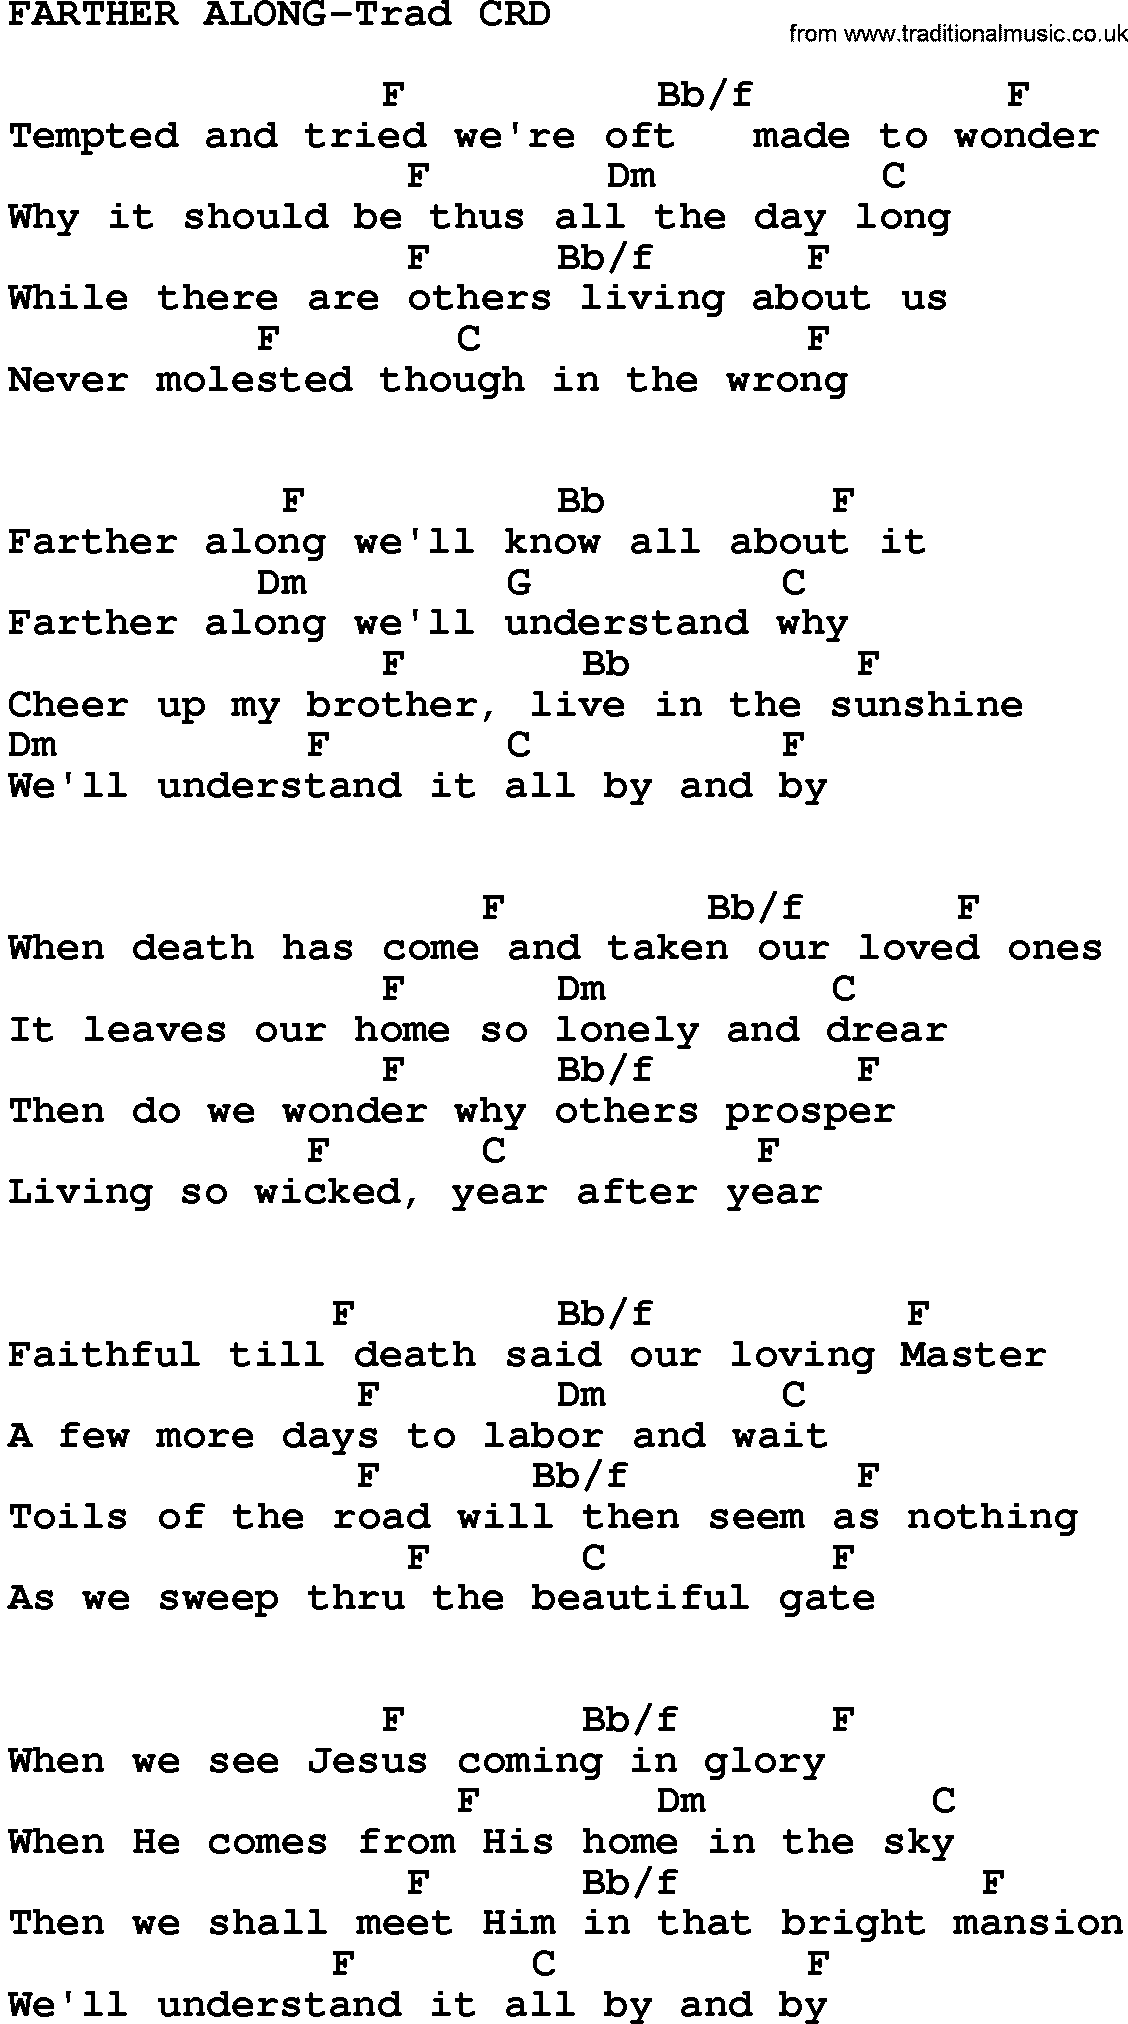 Gospel Song: Farther Along-Trad, lyrics and chords.